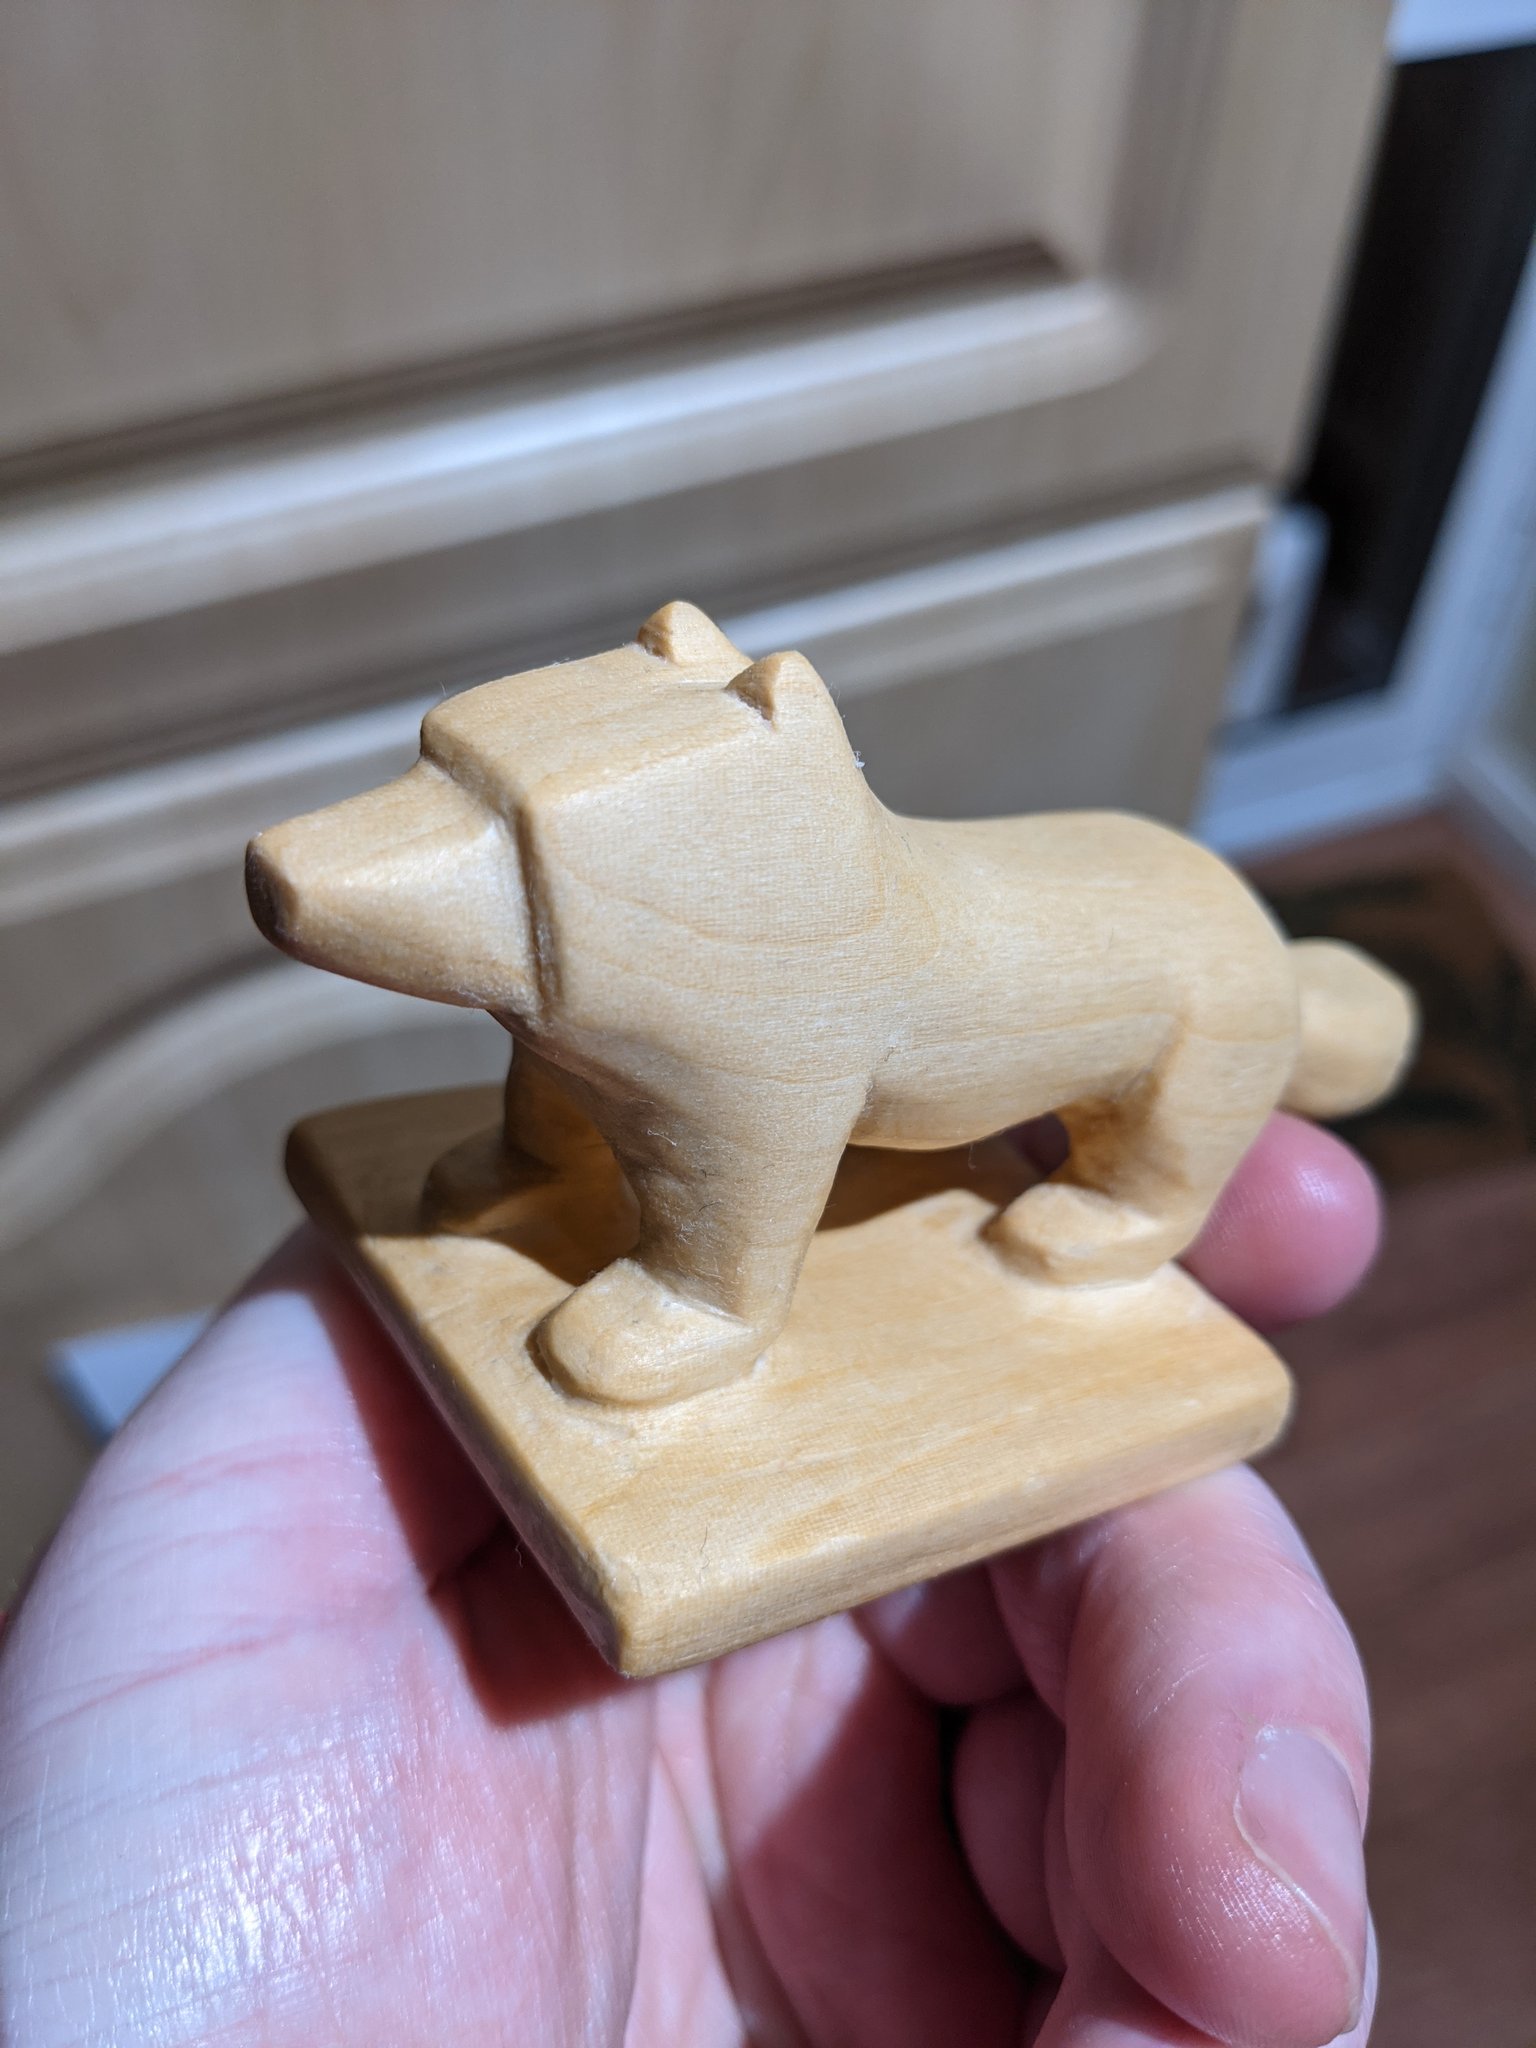 Side view of the finished dog, all edges look soft to touch and the wood grain can be clearly seen on the final golden finish